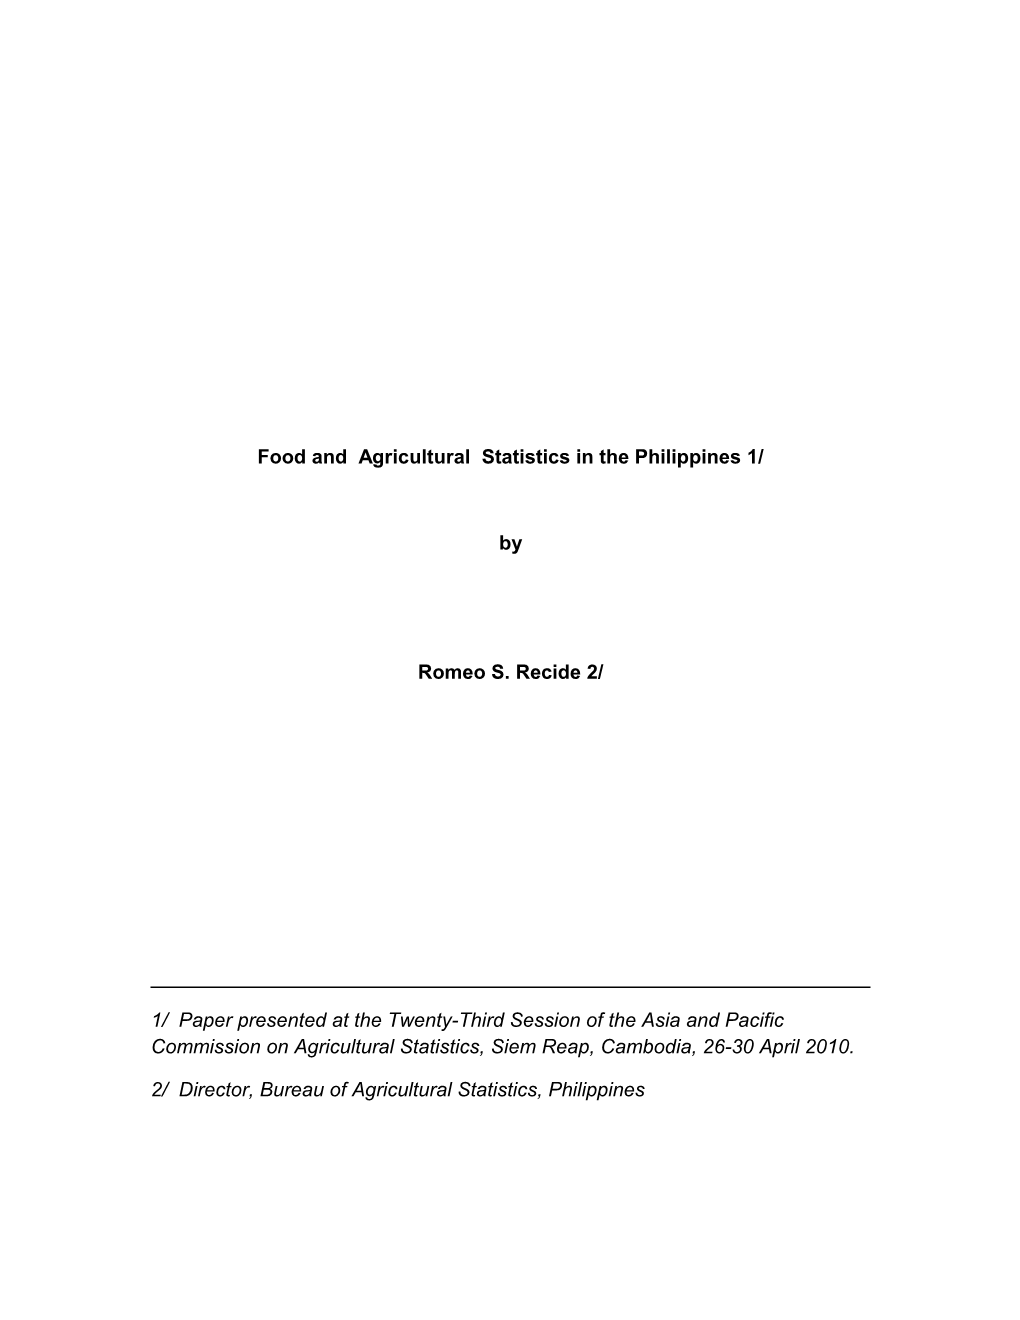 Food and Agricultural Statistics in the Philippines 1